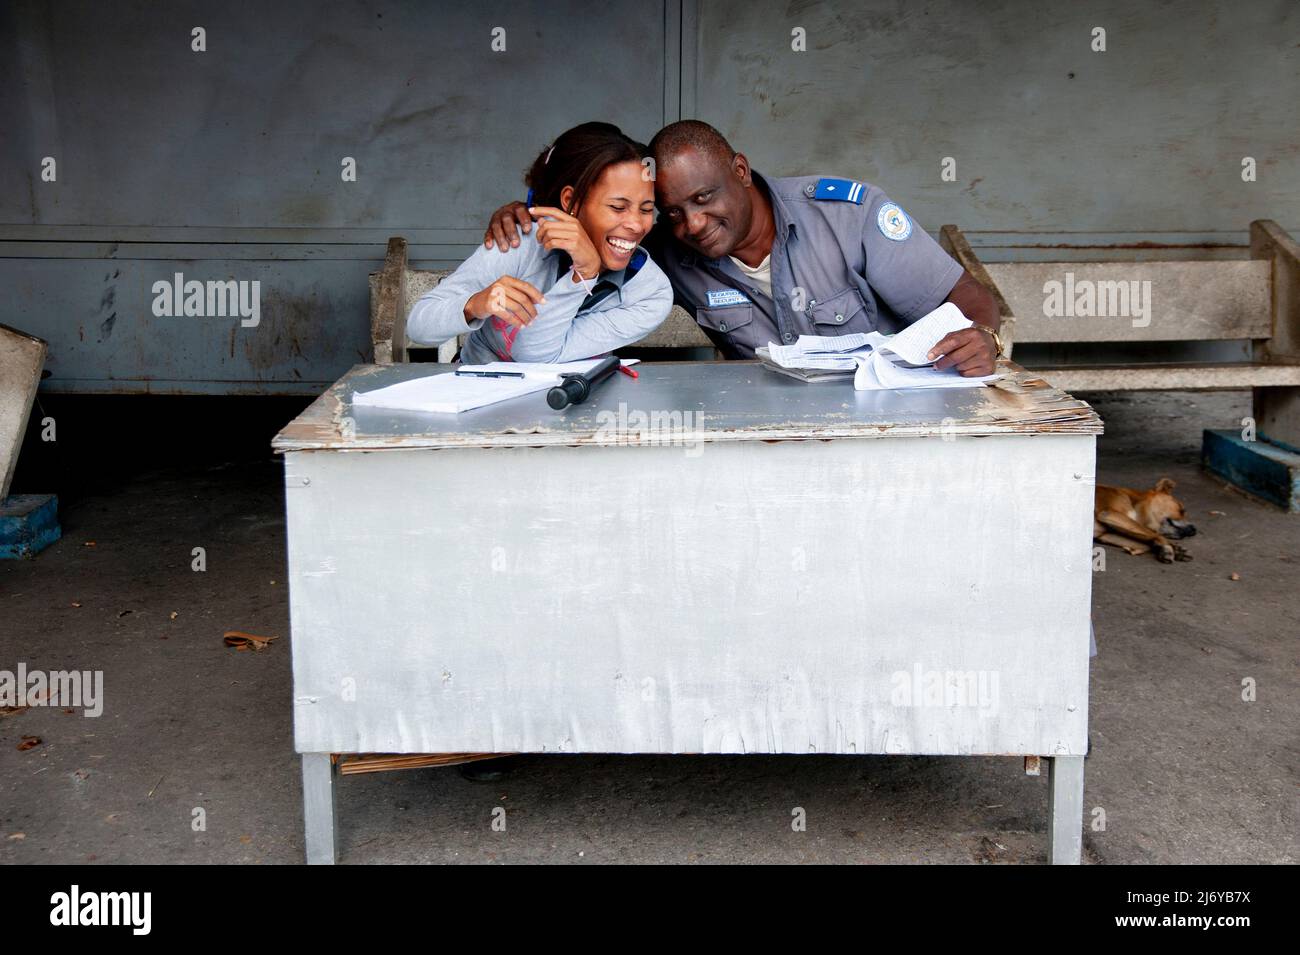 Cuban man and woman security office co-workers laugh together while working as a street dog sleeps on the ground in Havana, Cuba. Stock Photo